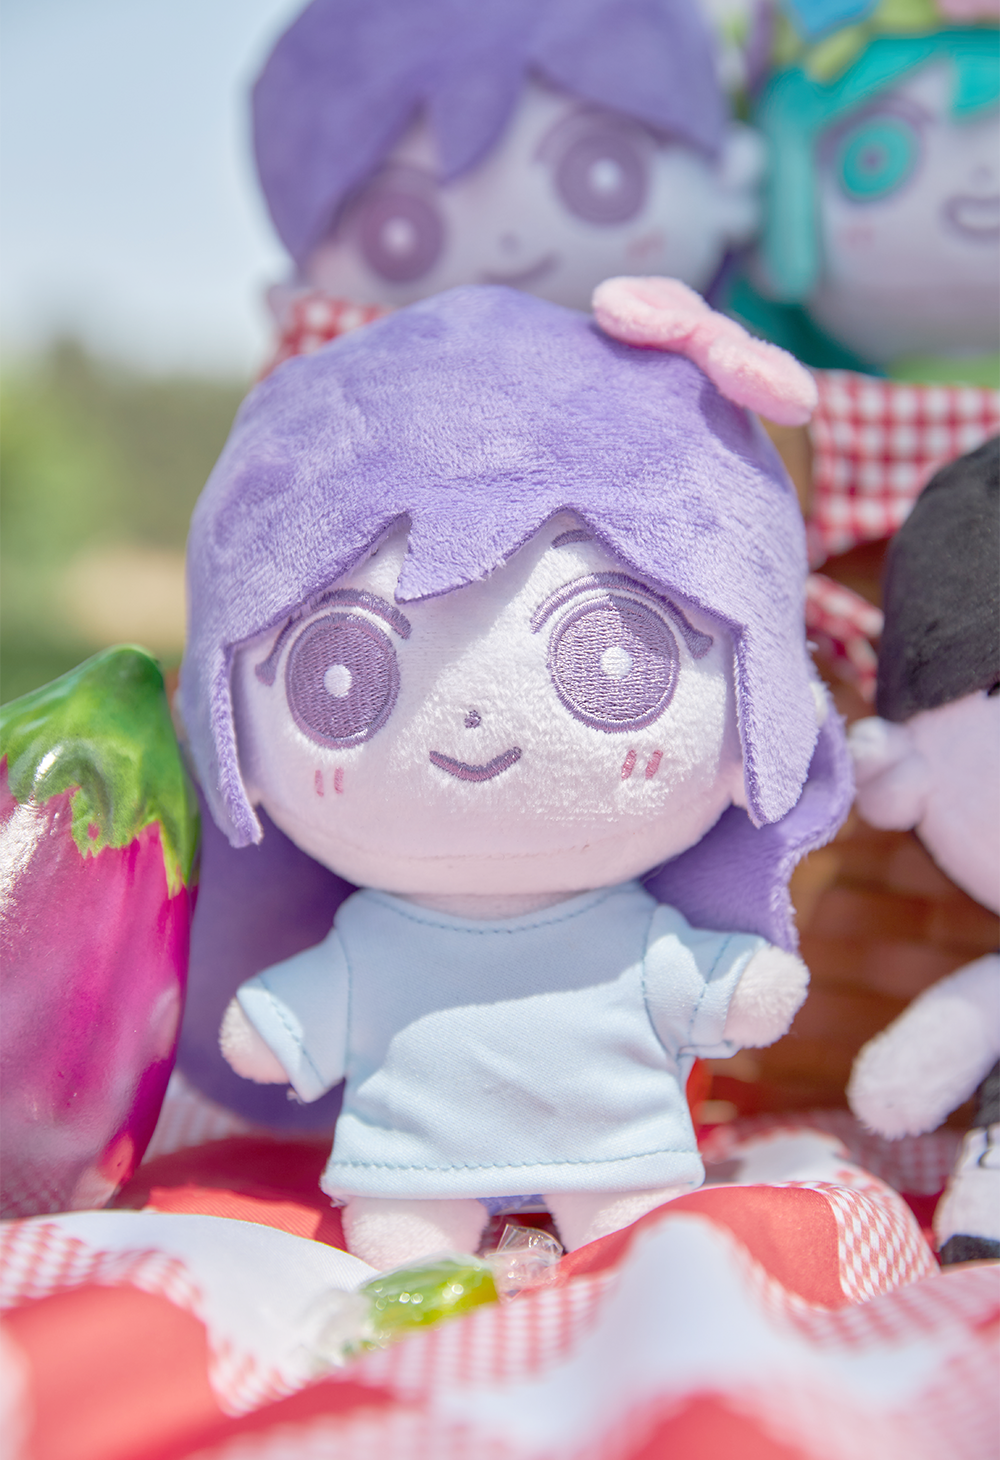 OMOCAT on X: OMORI plushies are now open for pre-order!  (  / X